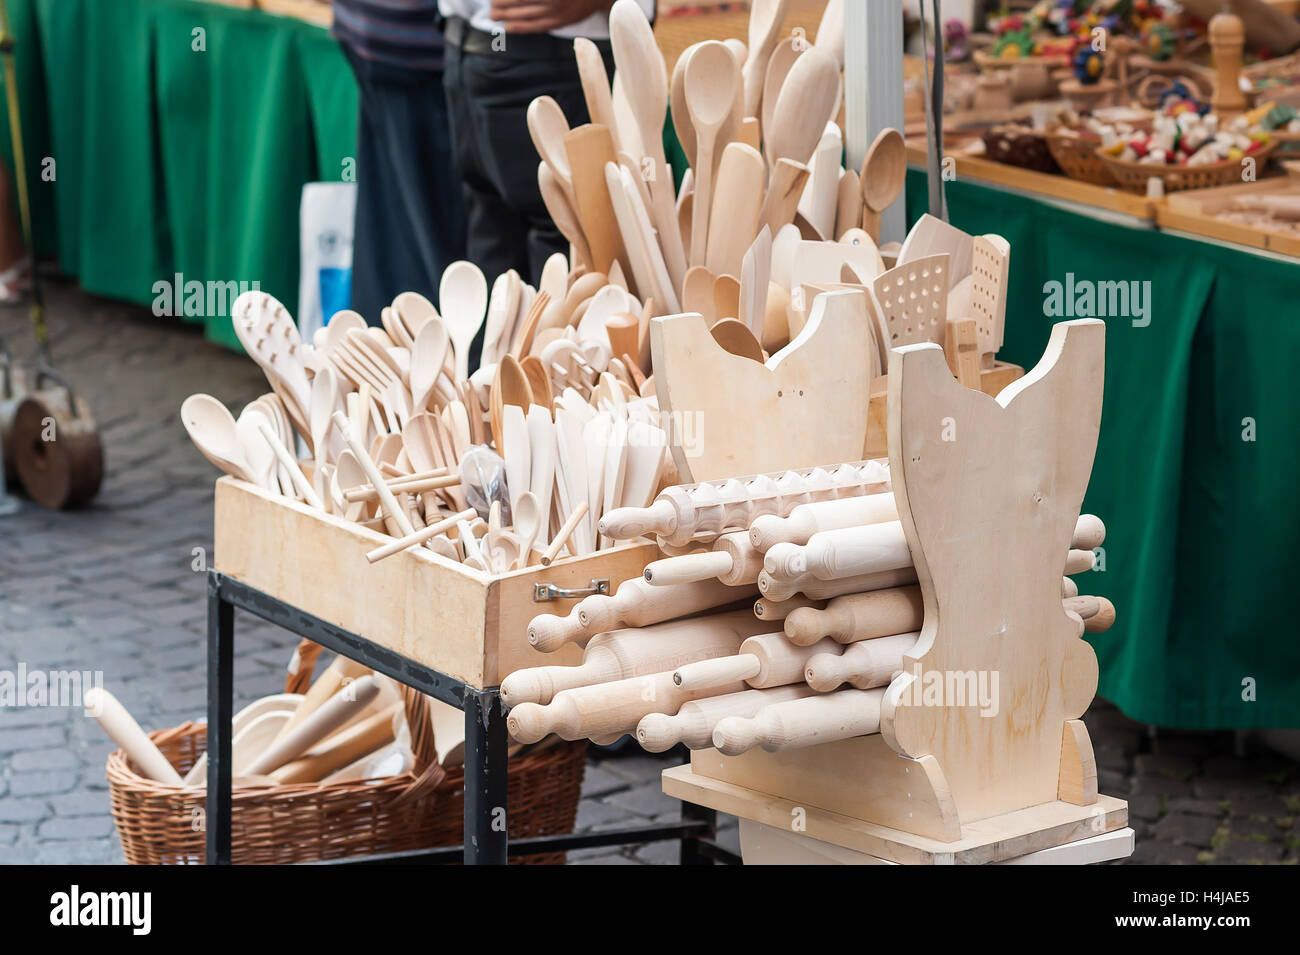 Handmade wooden, vintage kitchen utensils for sale at the market. Various wooden kitchen tools. Different wooden tableware. Stock Photo